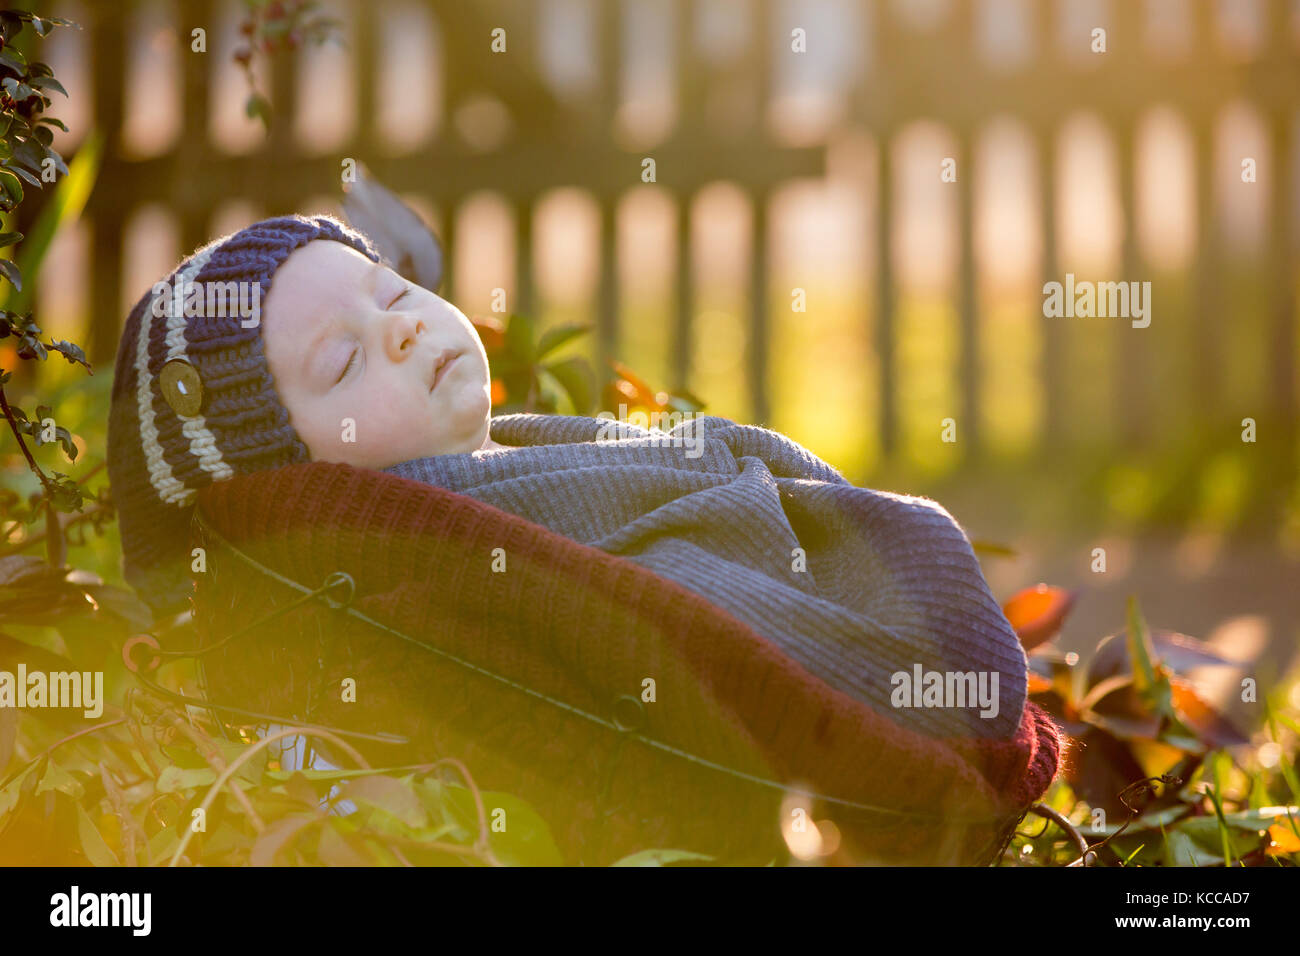 Little newborn baby boy, wrapped in scarf, lying in basket in forest, Amanita Muscaria mushrooms next to him Stock Photo